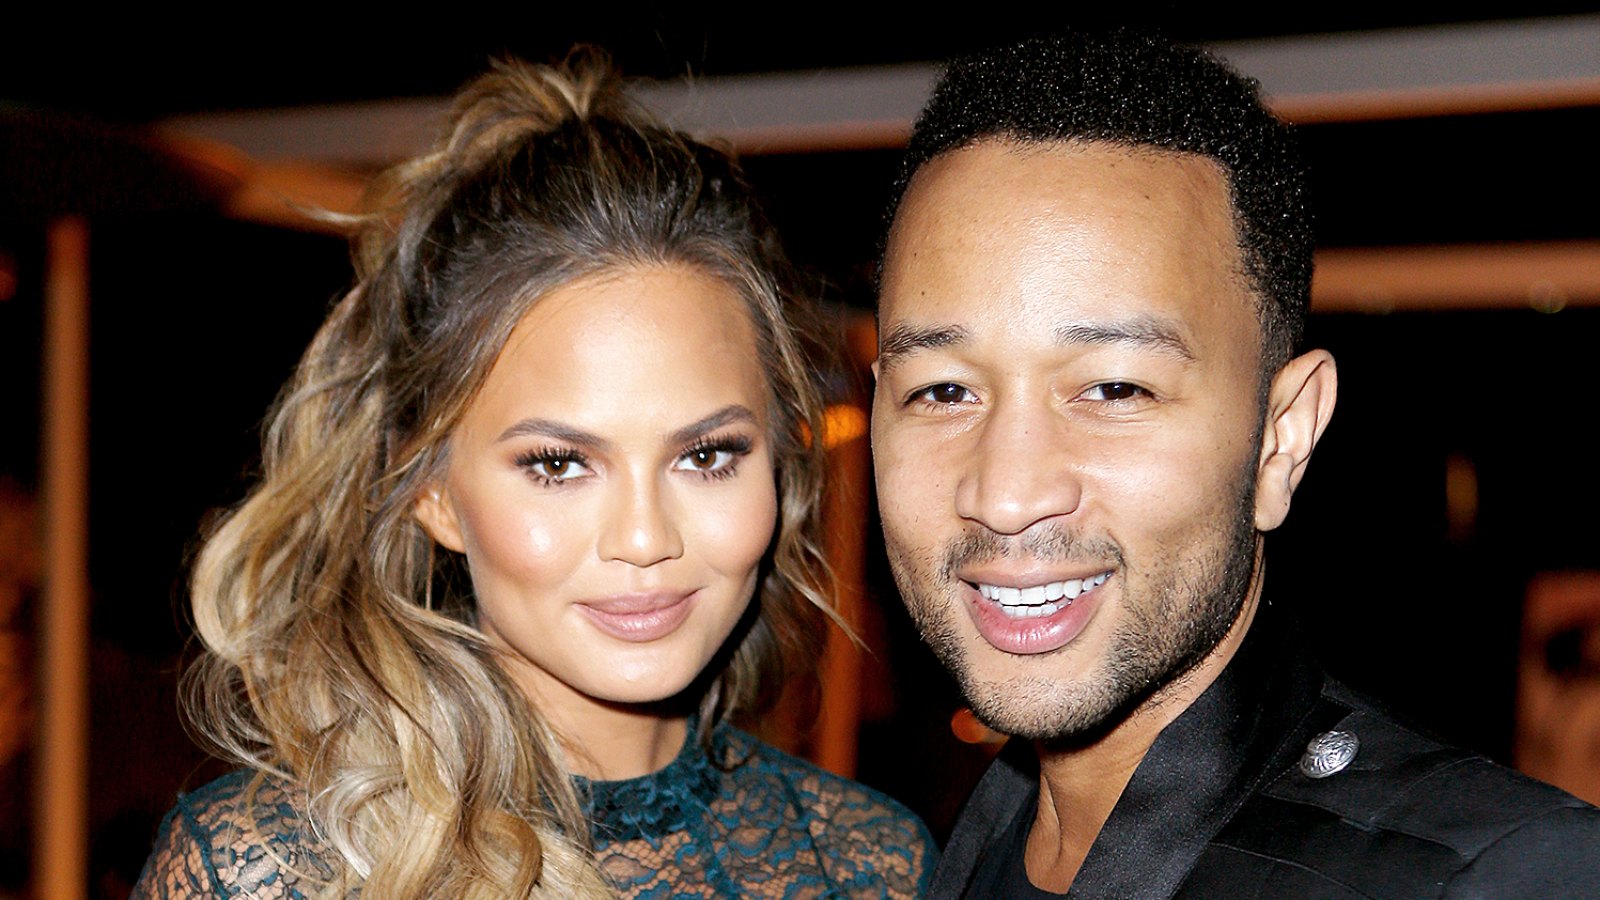 Chrissy Teigen and John Legend attend The Hollywood Reporter's Beauty Dinner at The London West Hollywood on November 11, 2015.